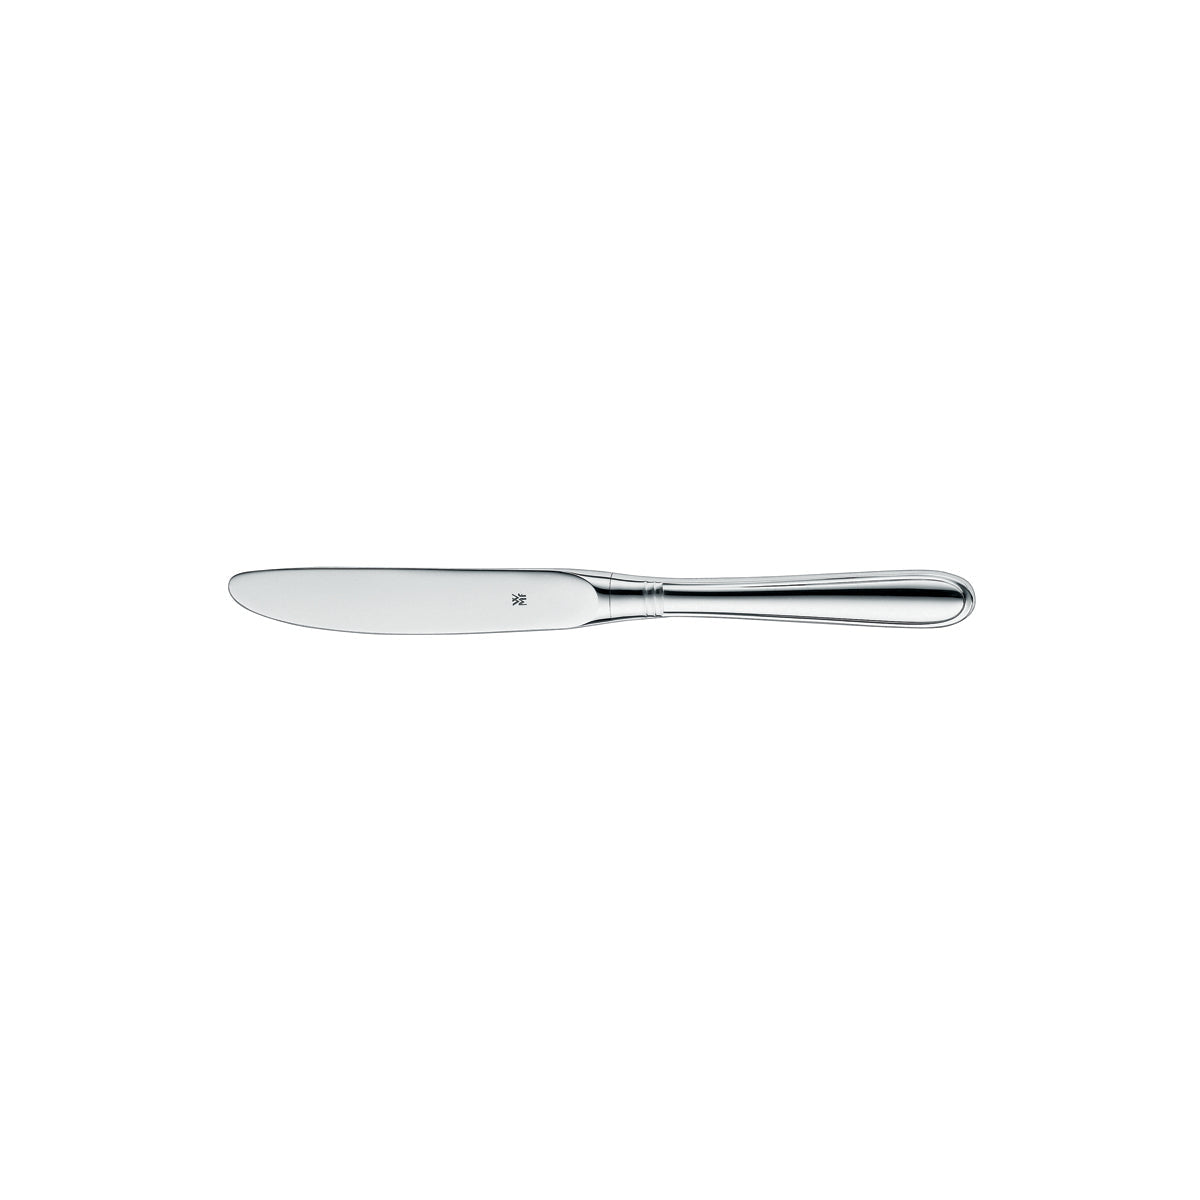 11.4703.6047 WMF Club Table Knife - Hollow Handle Stainless Steel Tomkin Australia Hospitality Supplies